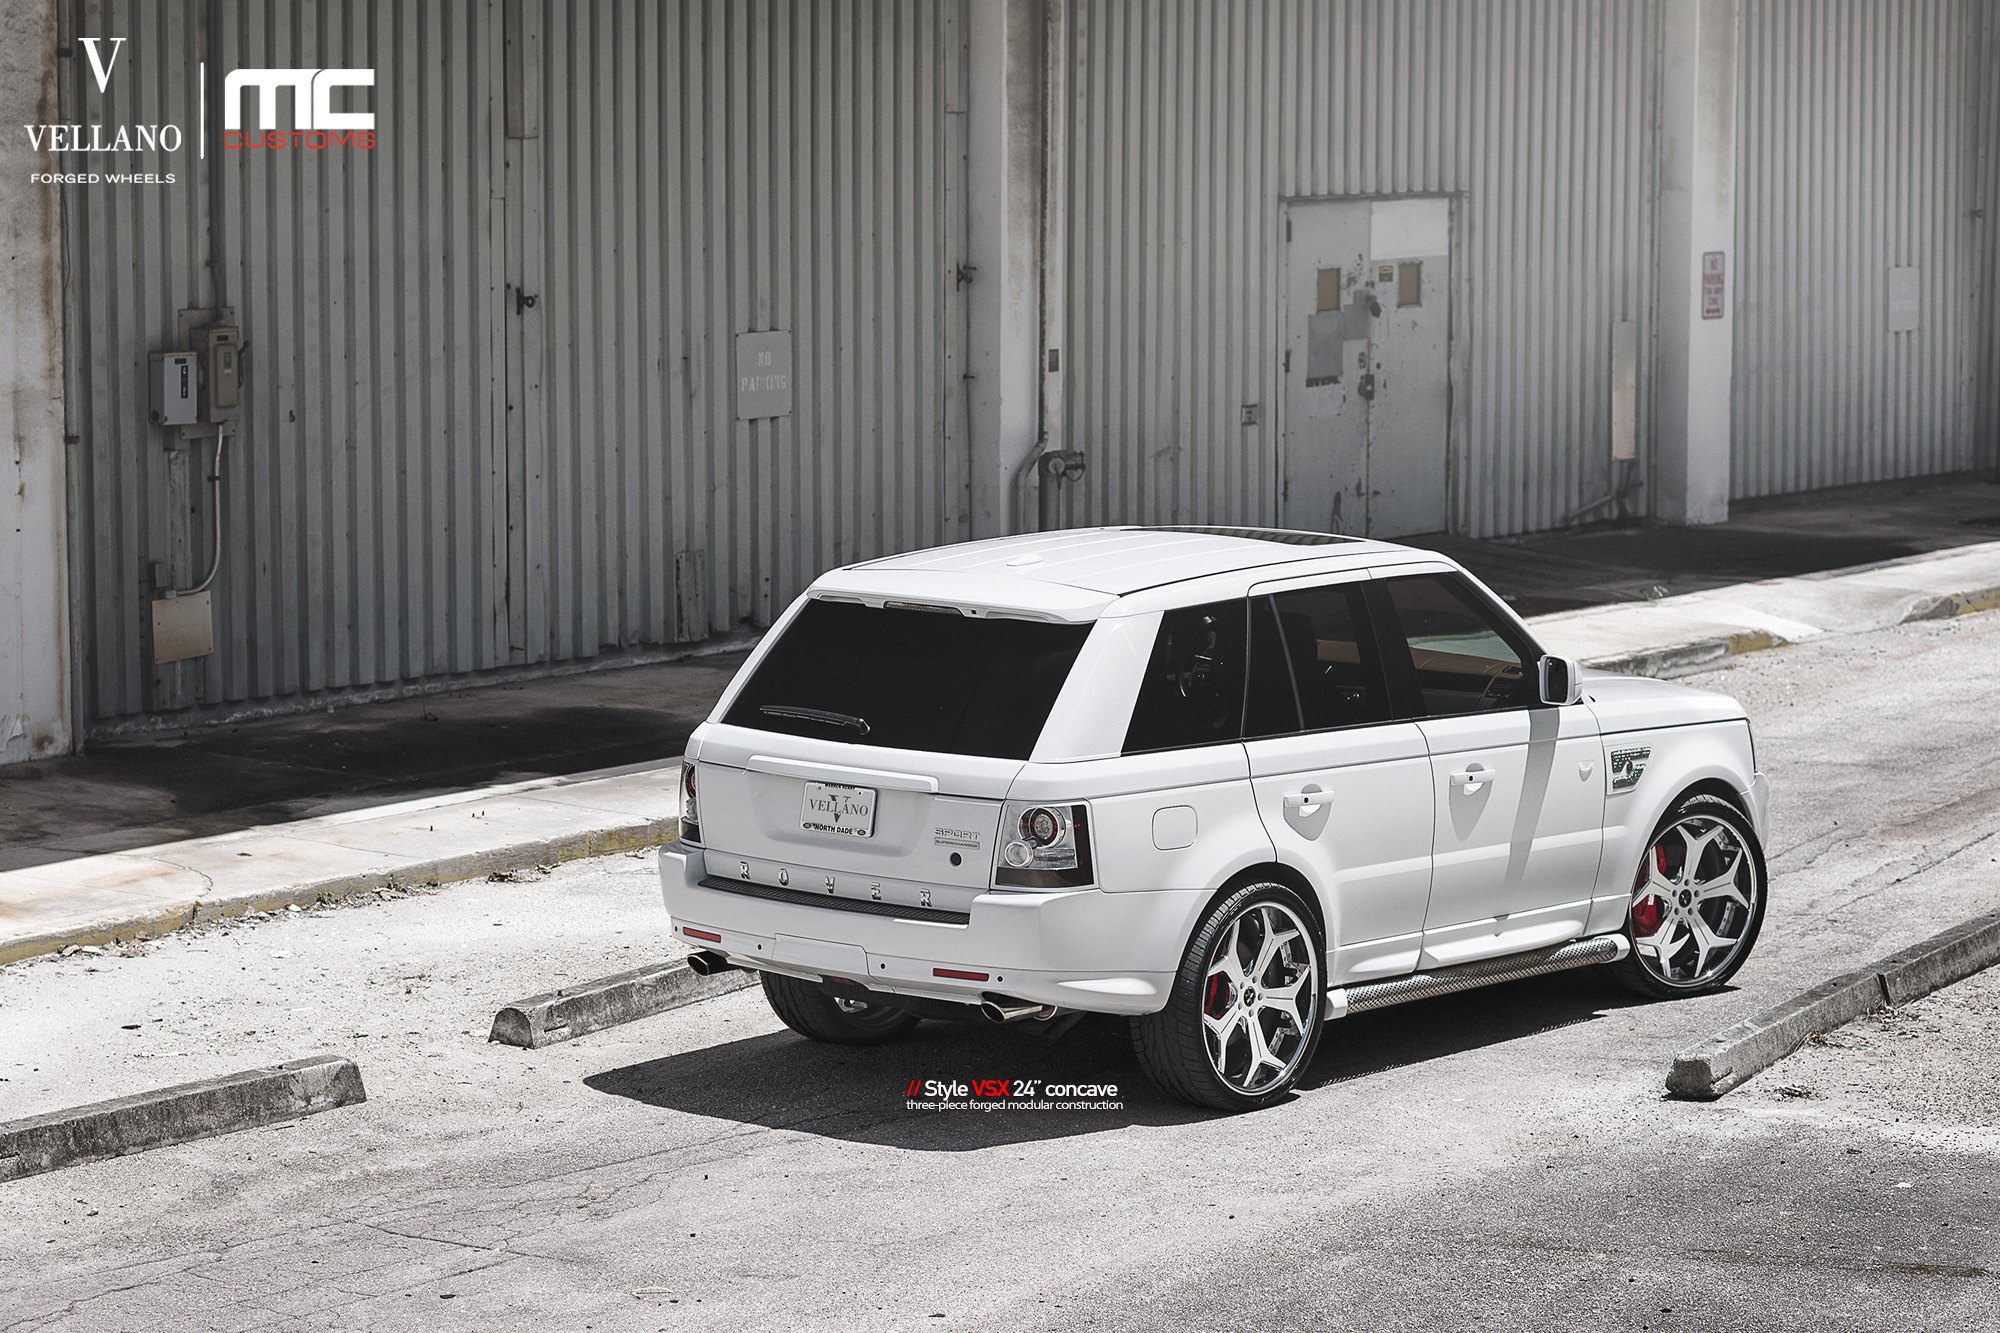 Aftermarket Rear Bumper on White Range Rover Sport - Photo by Vellano